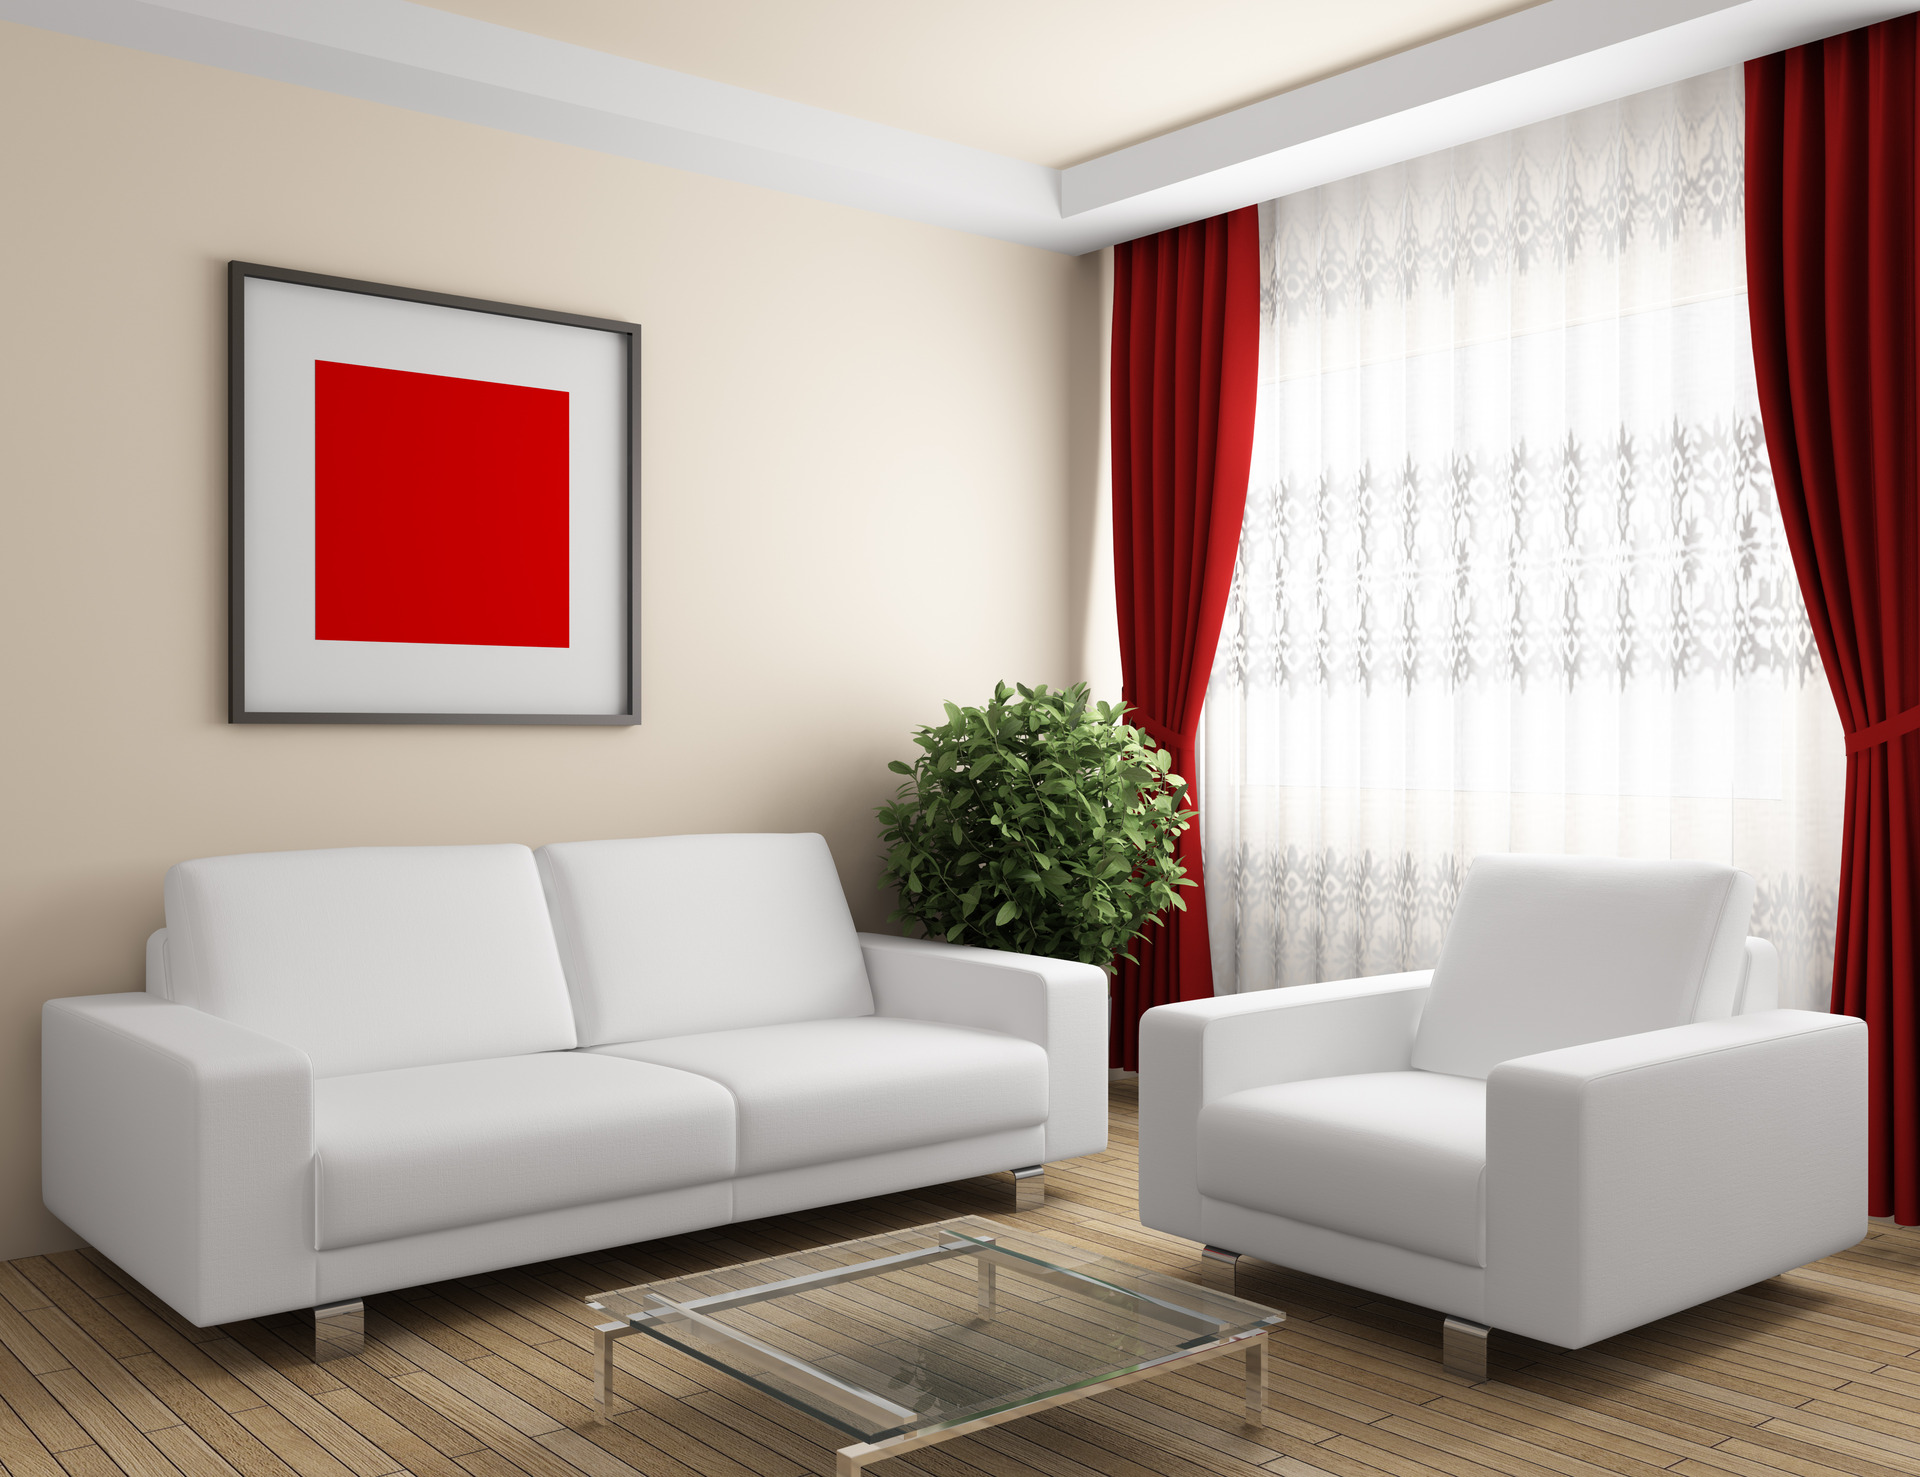 Curtains-Shop-In-Pune | Best-Curtains-In-India | Customized-Curtains-In-Pune 